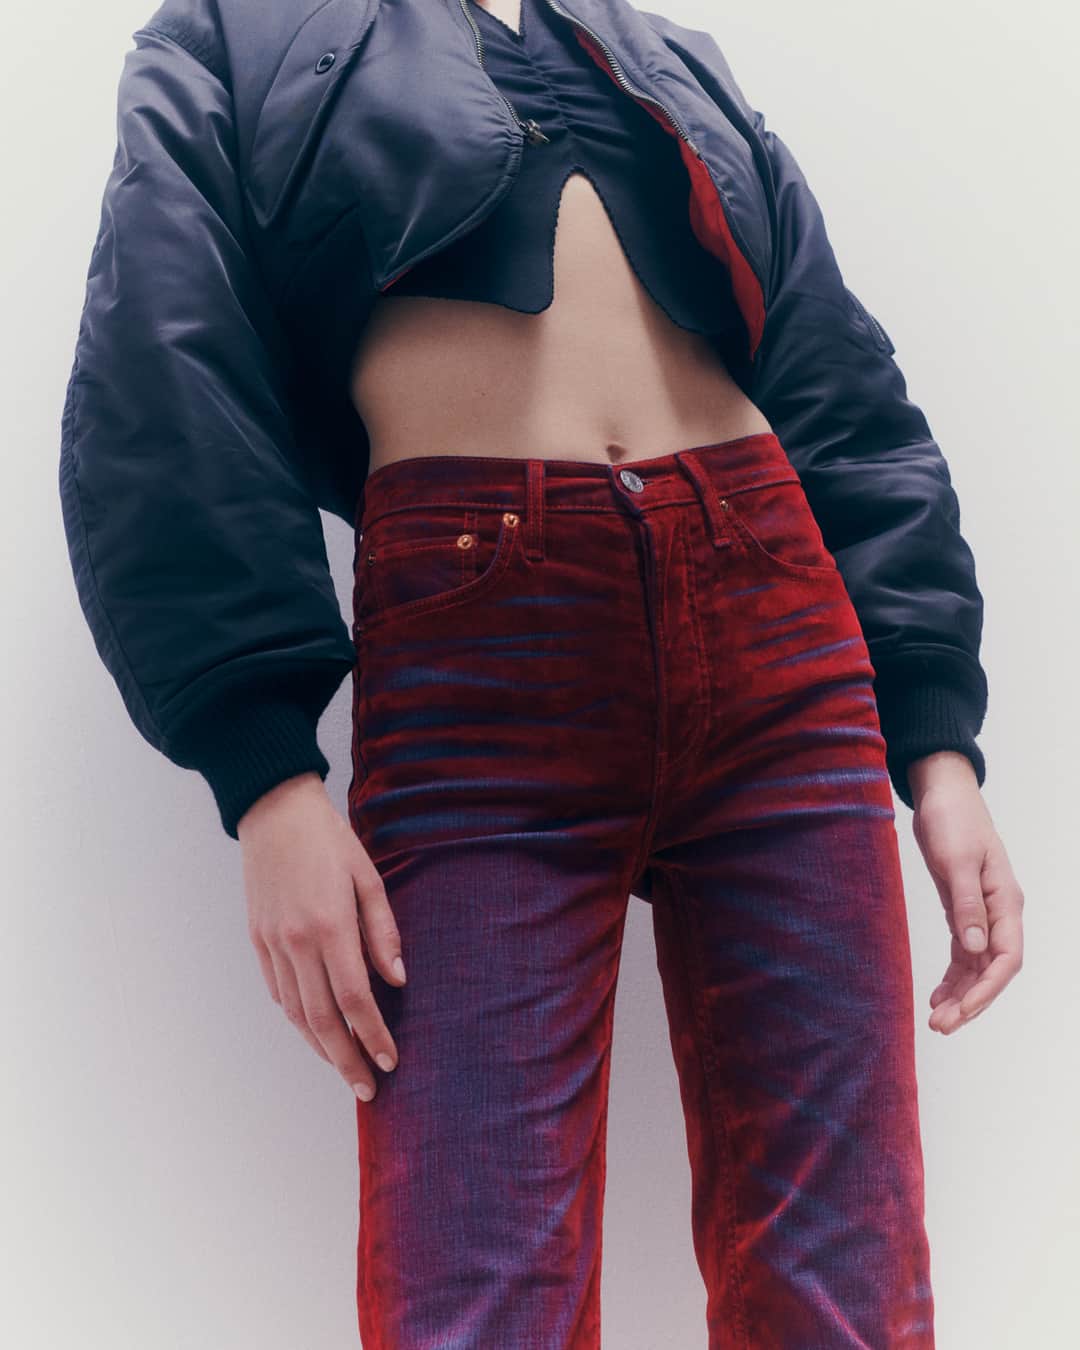 RE/DONEのインスタグラム：「Velvet coated denim. Discover our Flocked styles, now available online and in-store⁣  Talent: @roe.elema Photographer: @amitisraeli1  Creative Agency: @ljbtnstudio​​​​​​​​​​​​​​​​ Stylist: @lolitajacobs​​​​​​​​​​​​​​​​ Makeup: @mayumioda25 Hair stylist: @louisghewy Casting Director: @arthurmejean  Set designer: @nico.lall⠀⠀ Production: @arthuretphilippine」